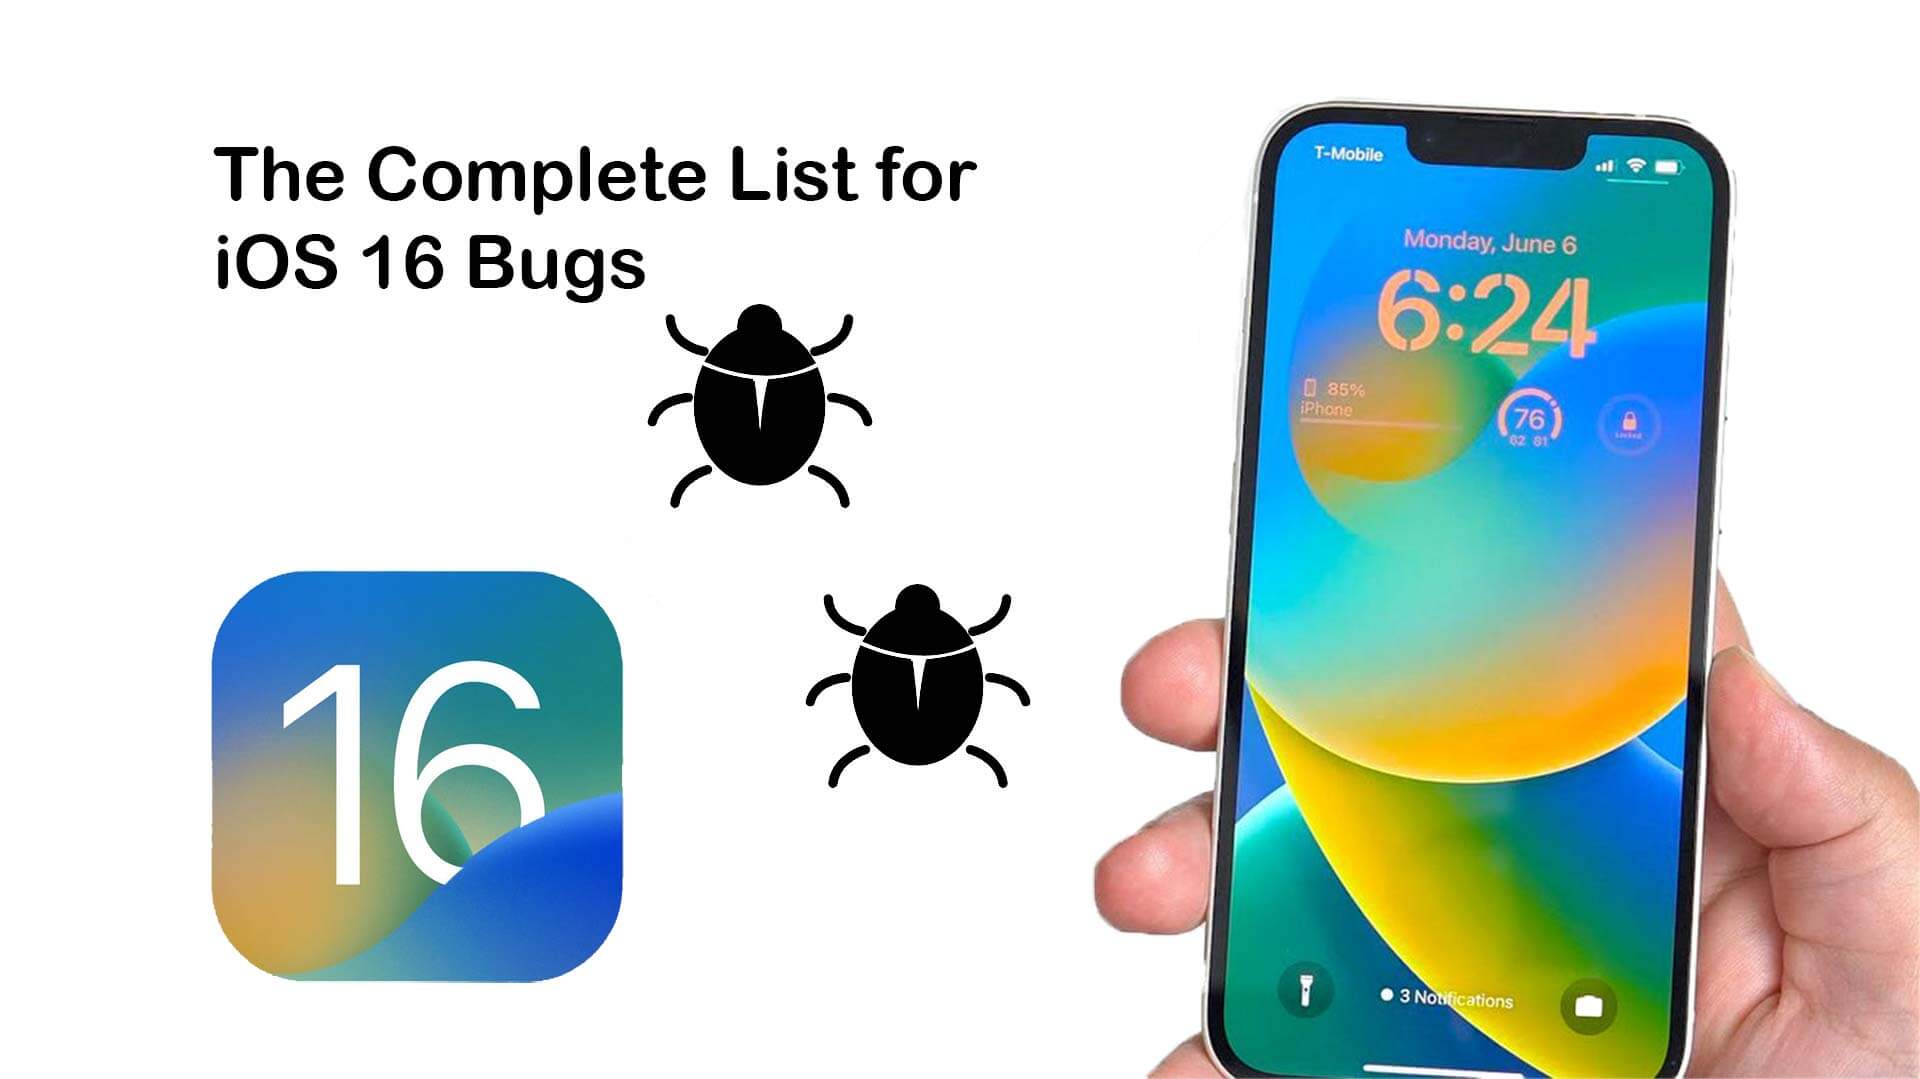 The most complete list for iOS 16 Bugs